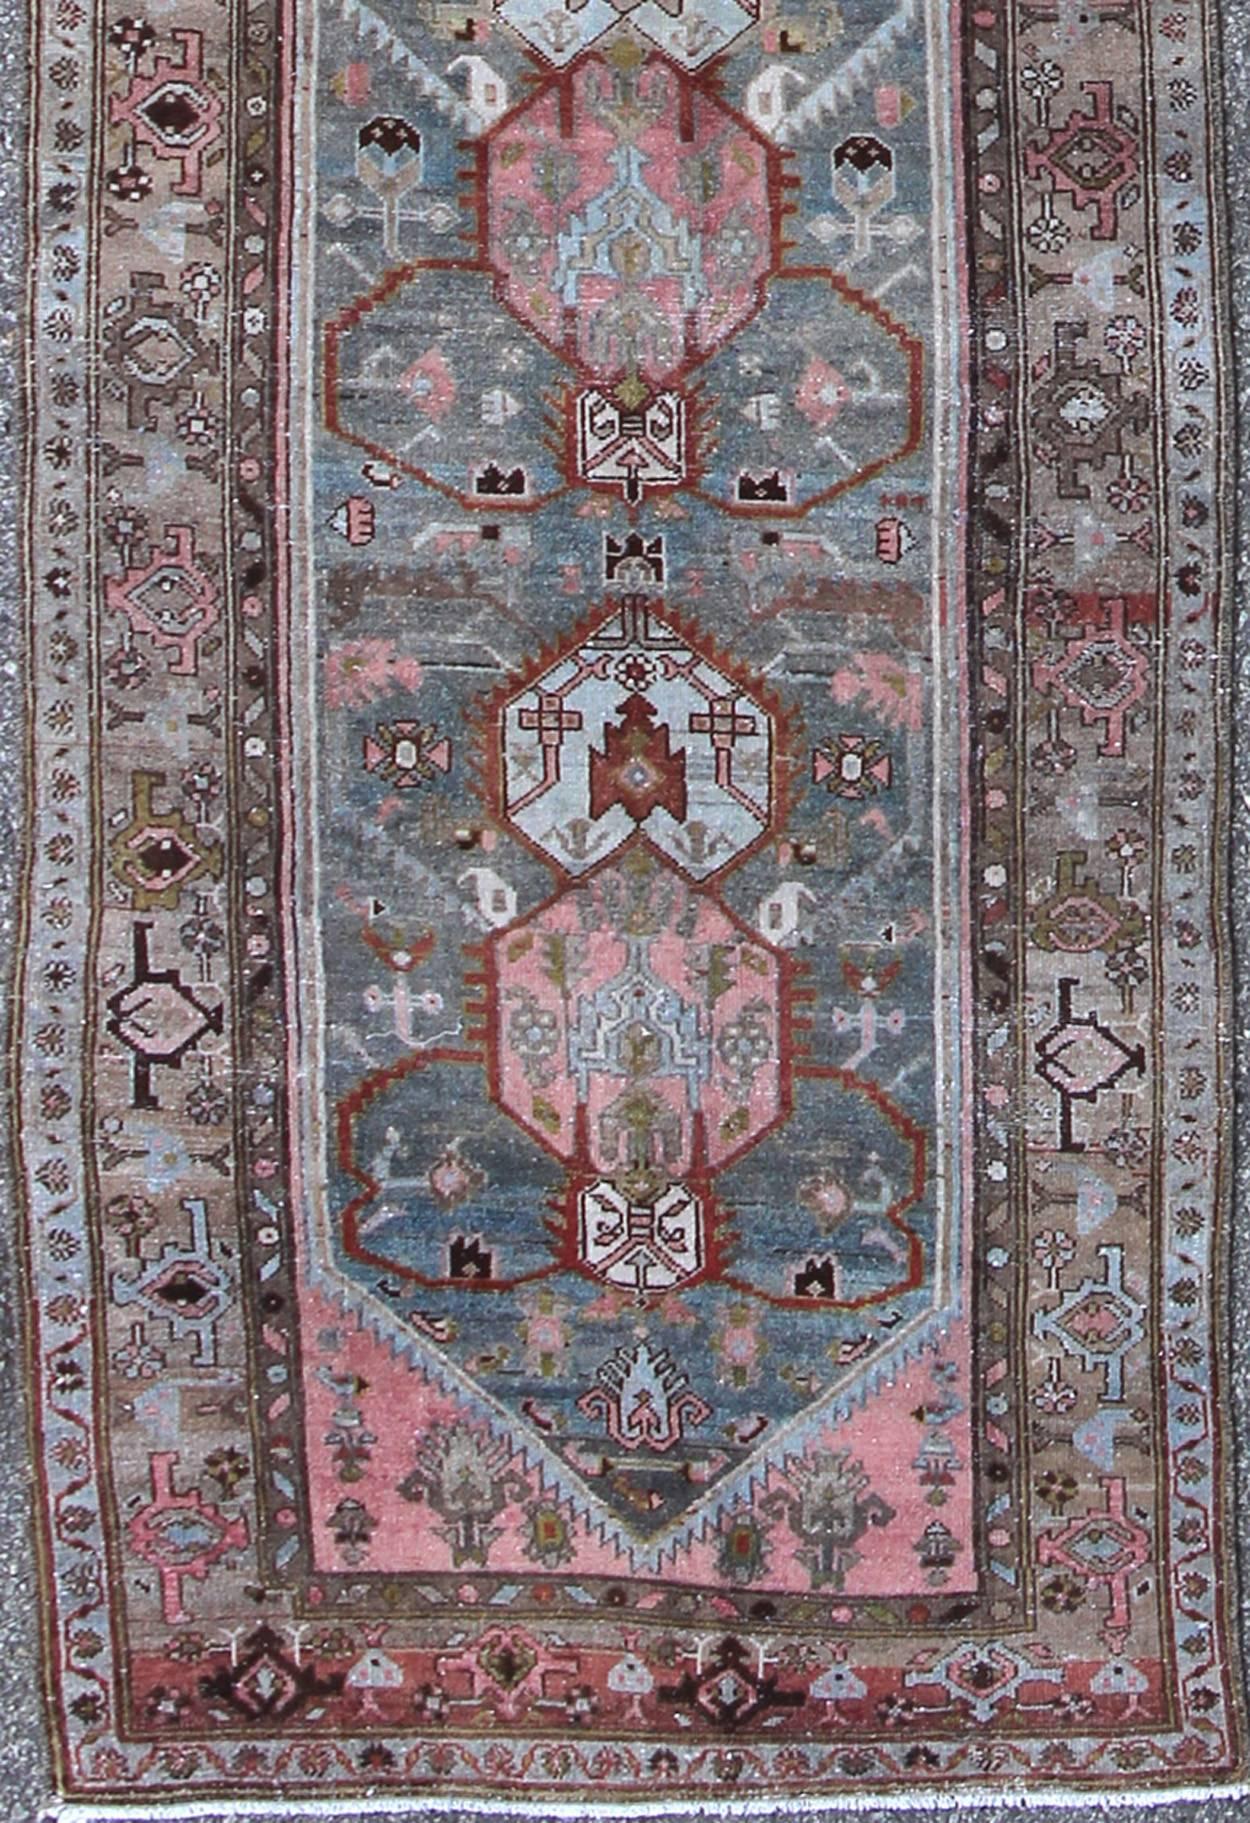 This magnificent antique Persian Malayer runner, of an impressive size, bears a beautiful, all-over sub-geometric design paired with a delightful palette of various shades of light blue, pink, red, ivory, pea green, and taupe. The central field is